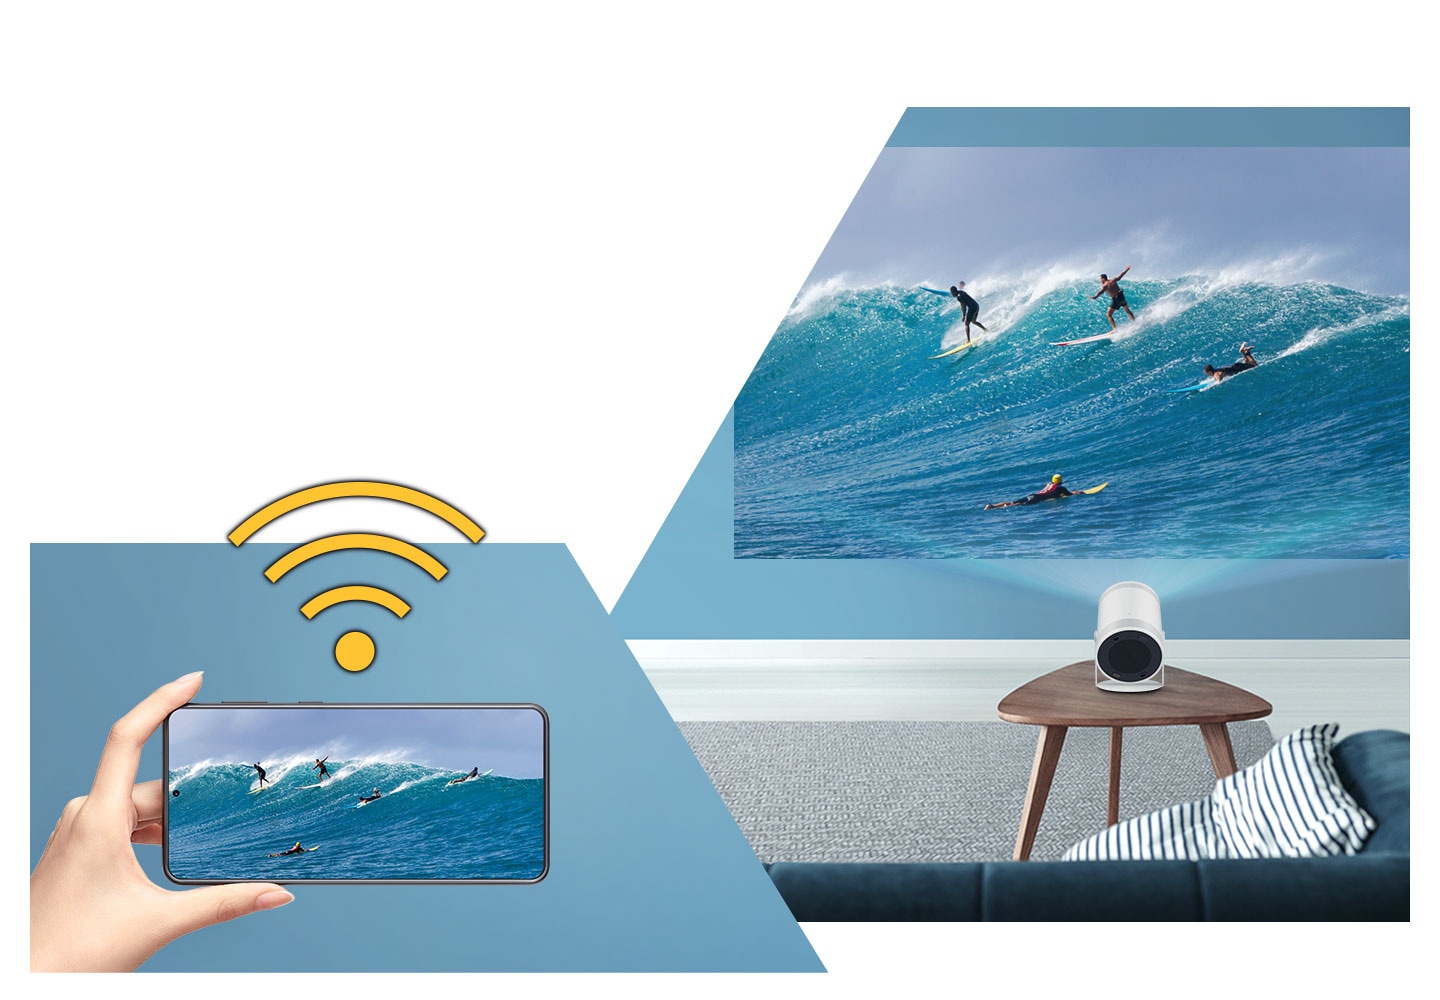 Wi-Fi sign over a hand holding a mobile device. A surfing picture on the mobile device is mirrored on The Freestyle's large screen.